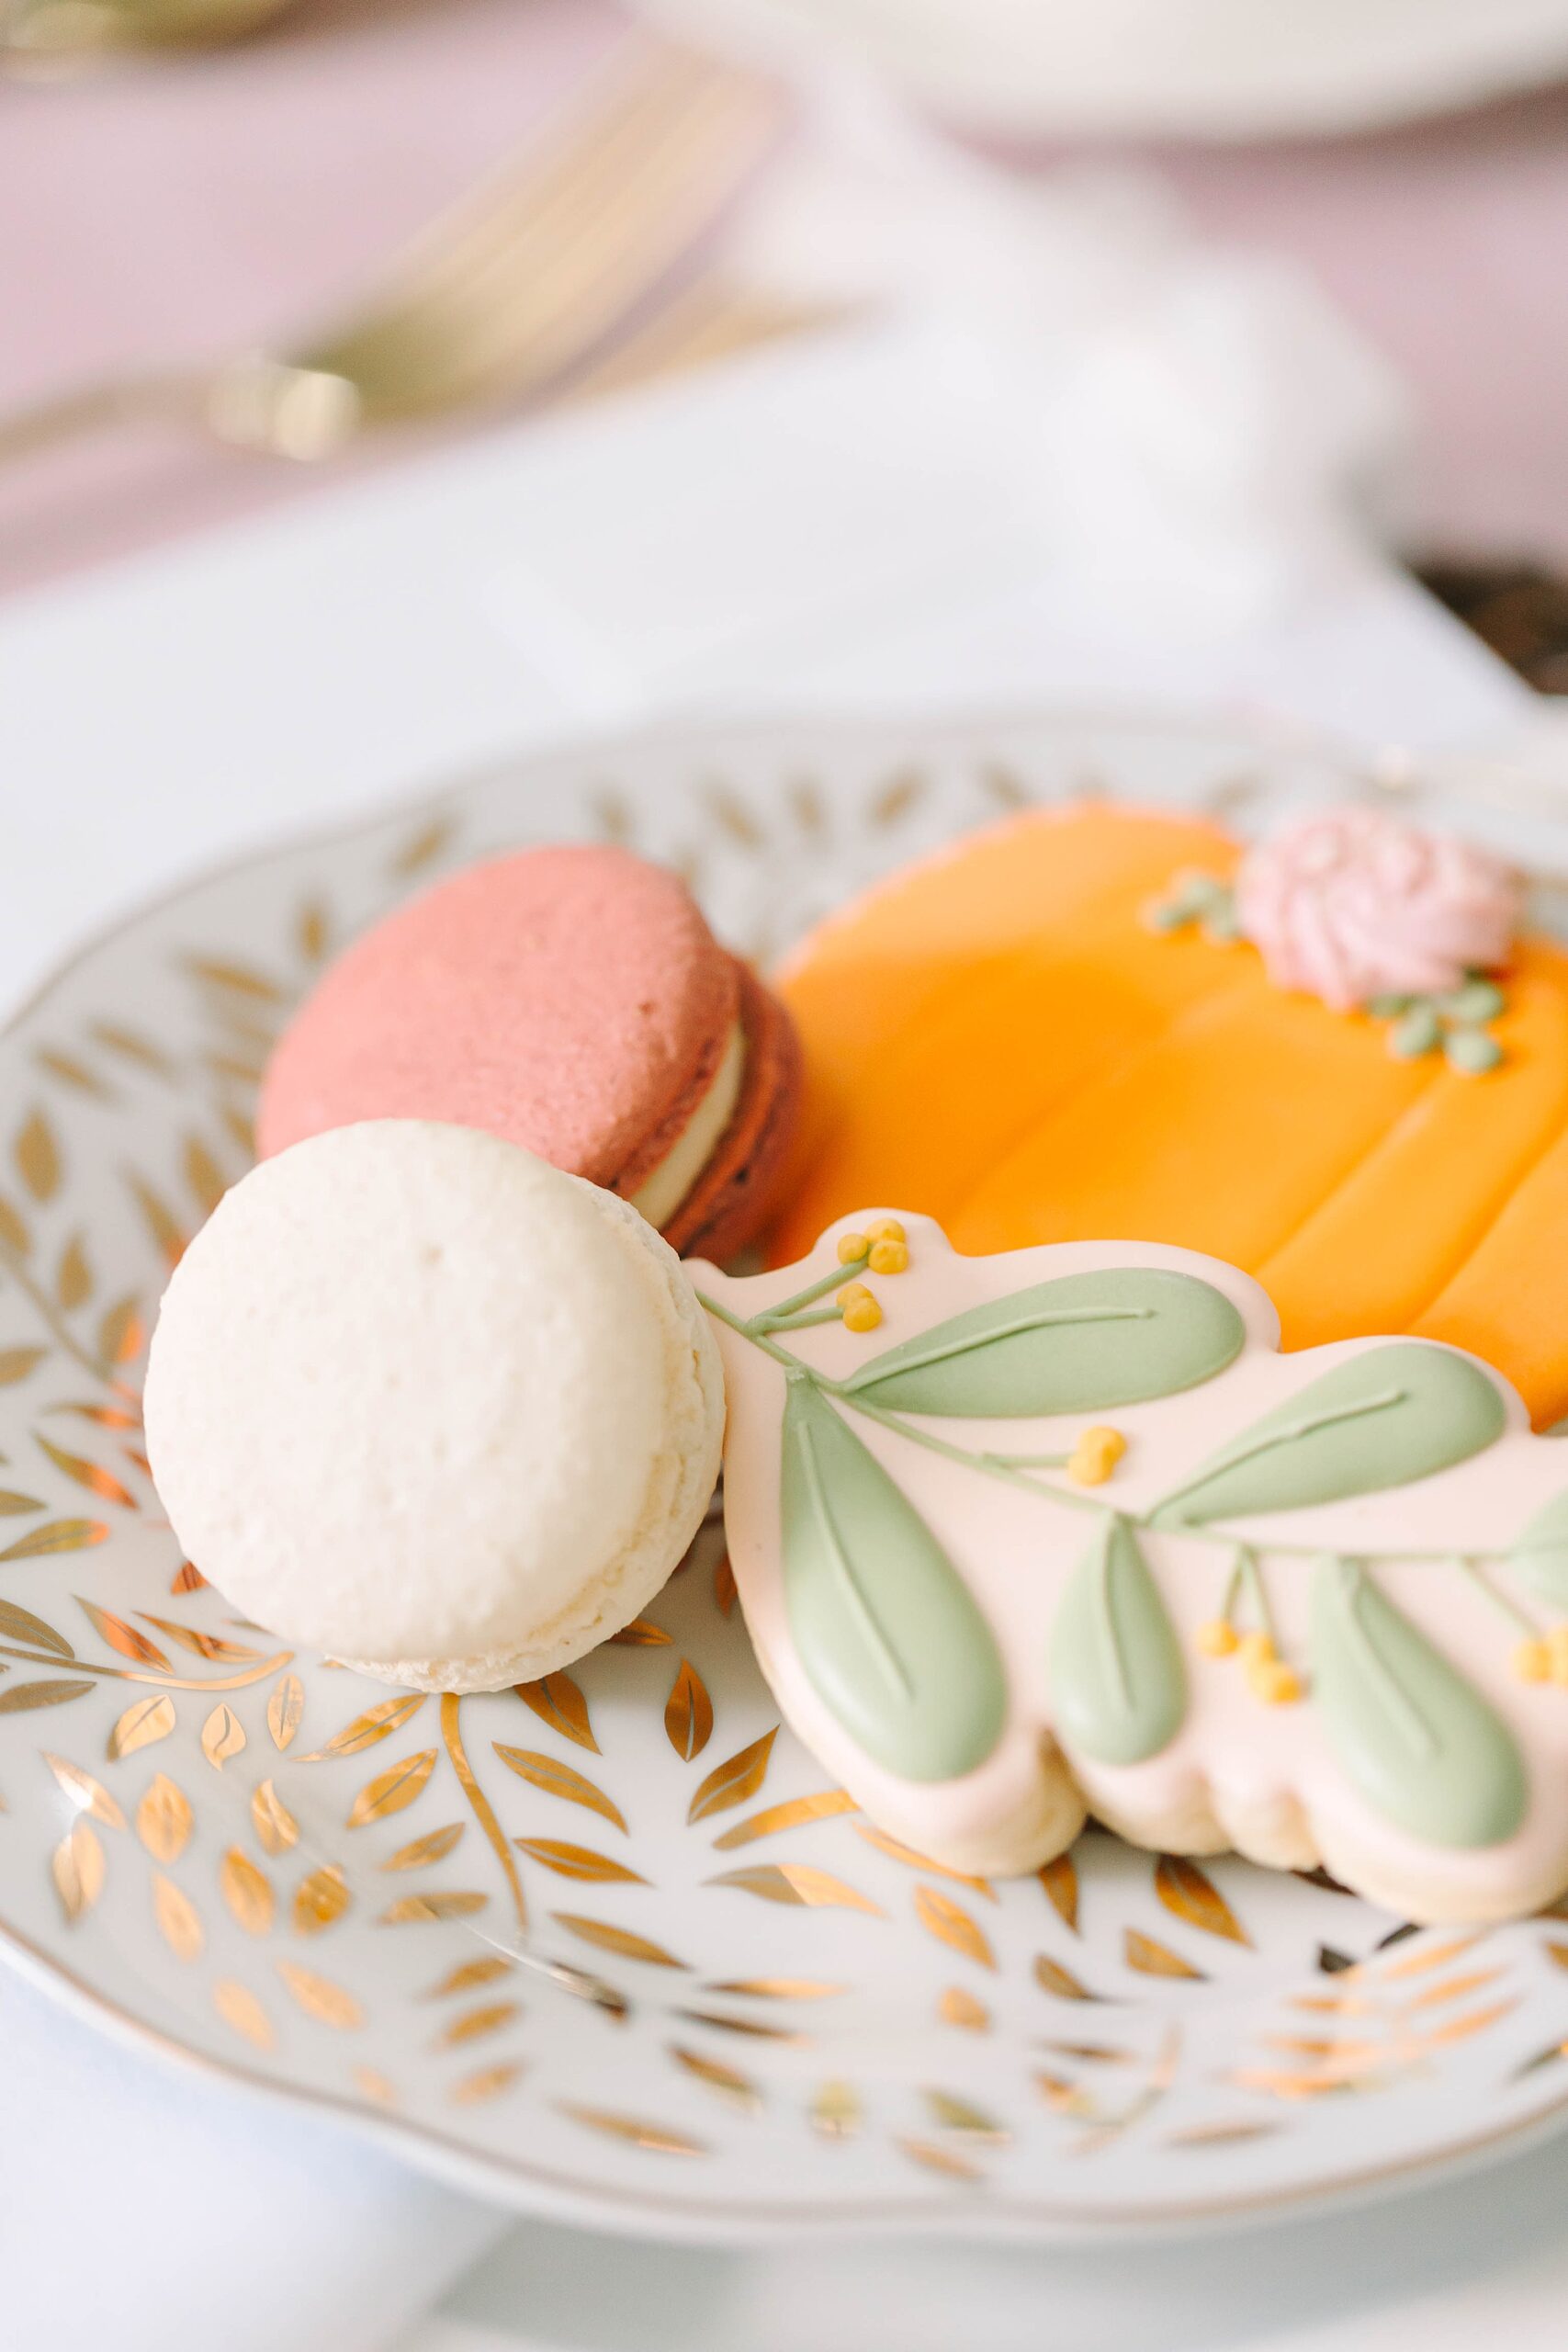 pumpkin shaped cookie and macaroons for fall and Thanksgiving inspired tea by Pretty Lovely Teas